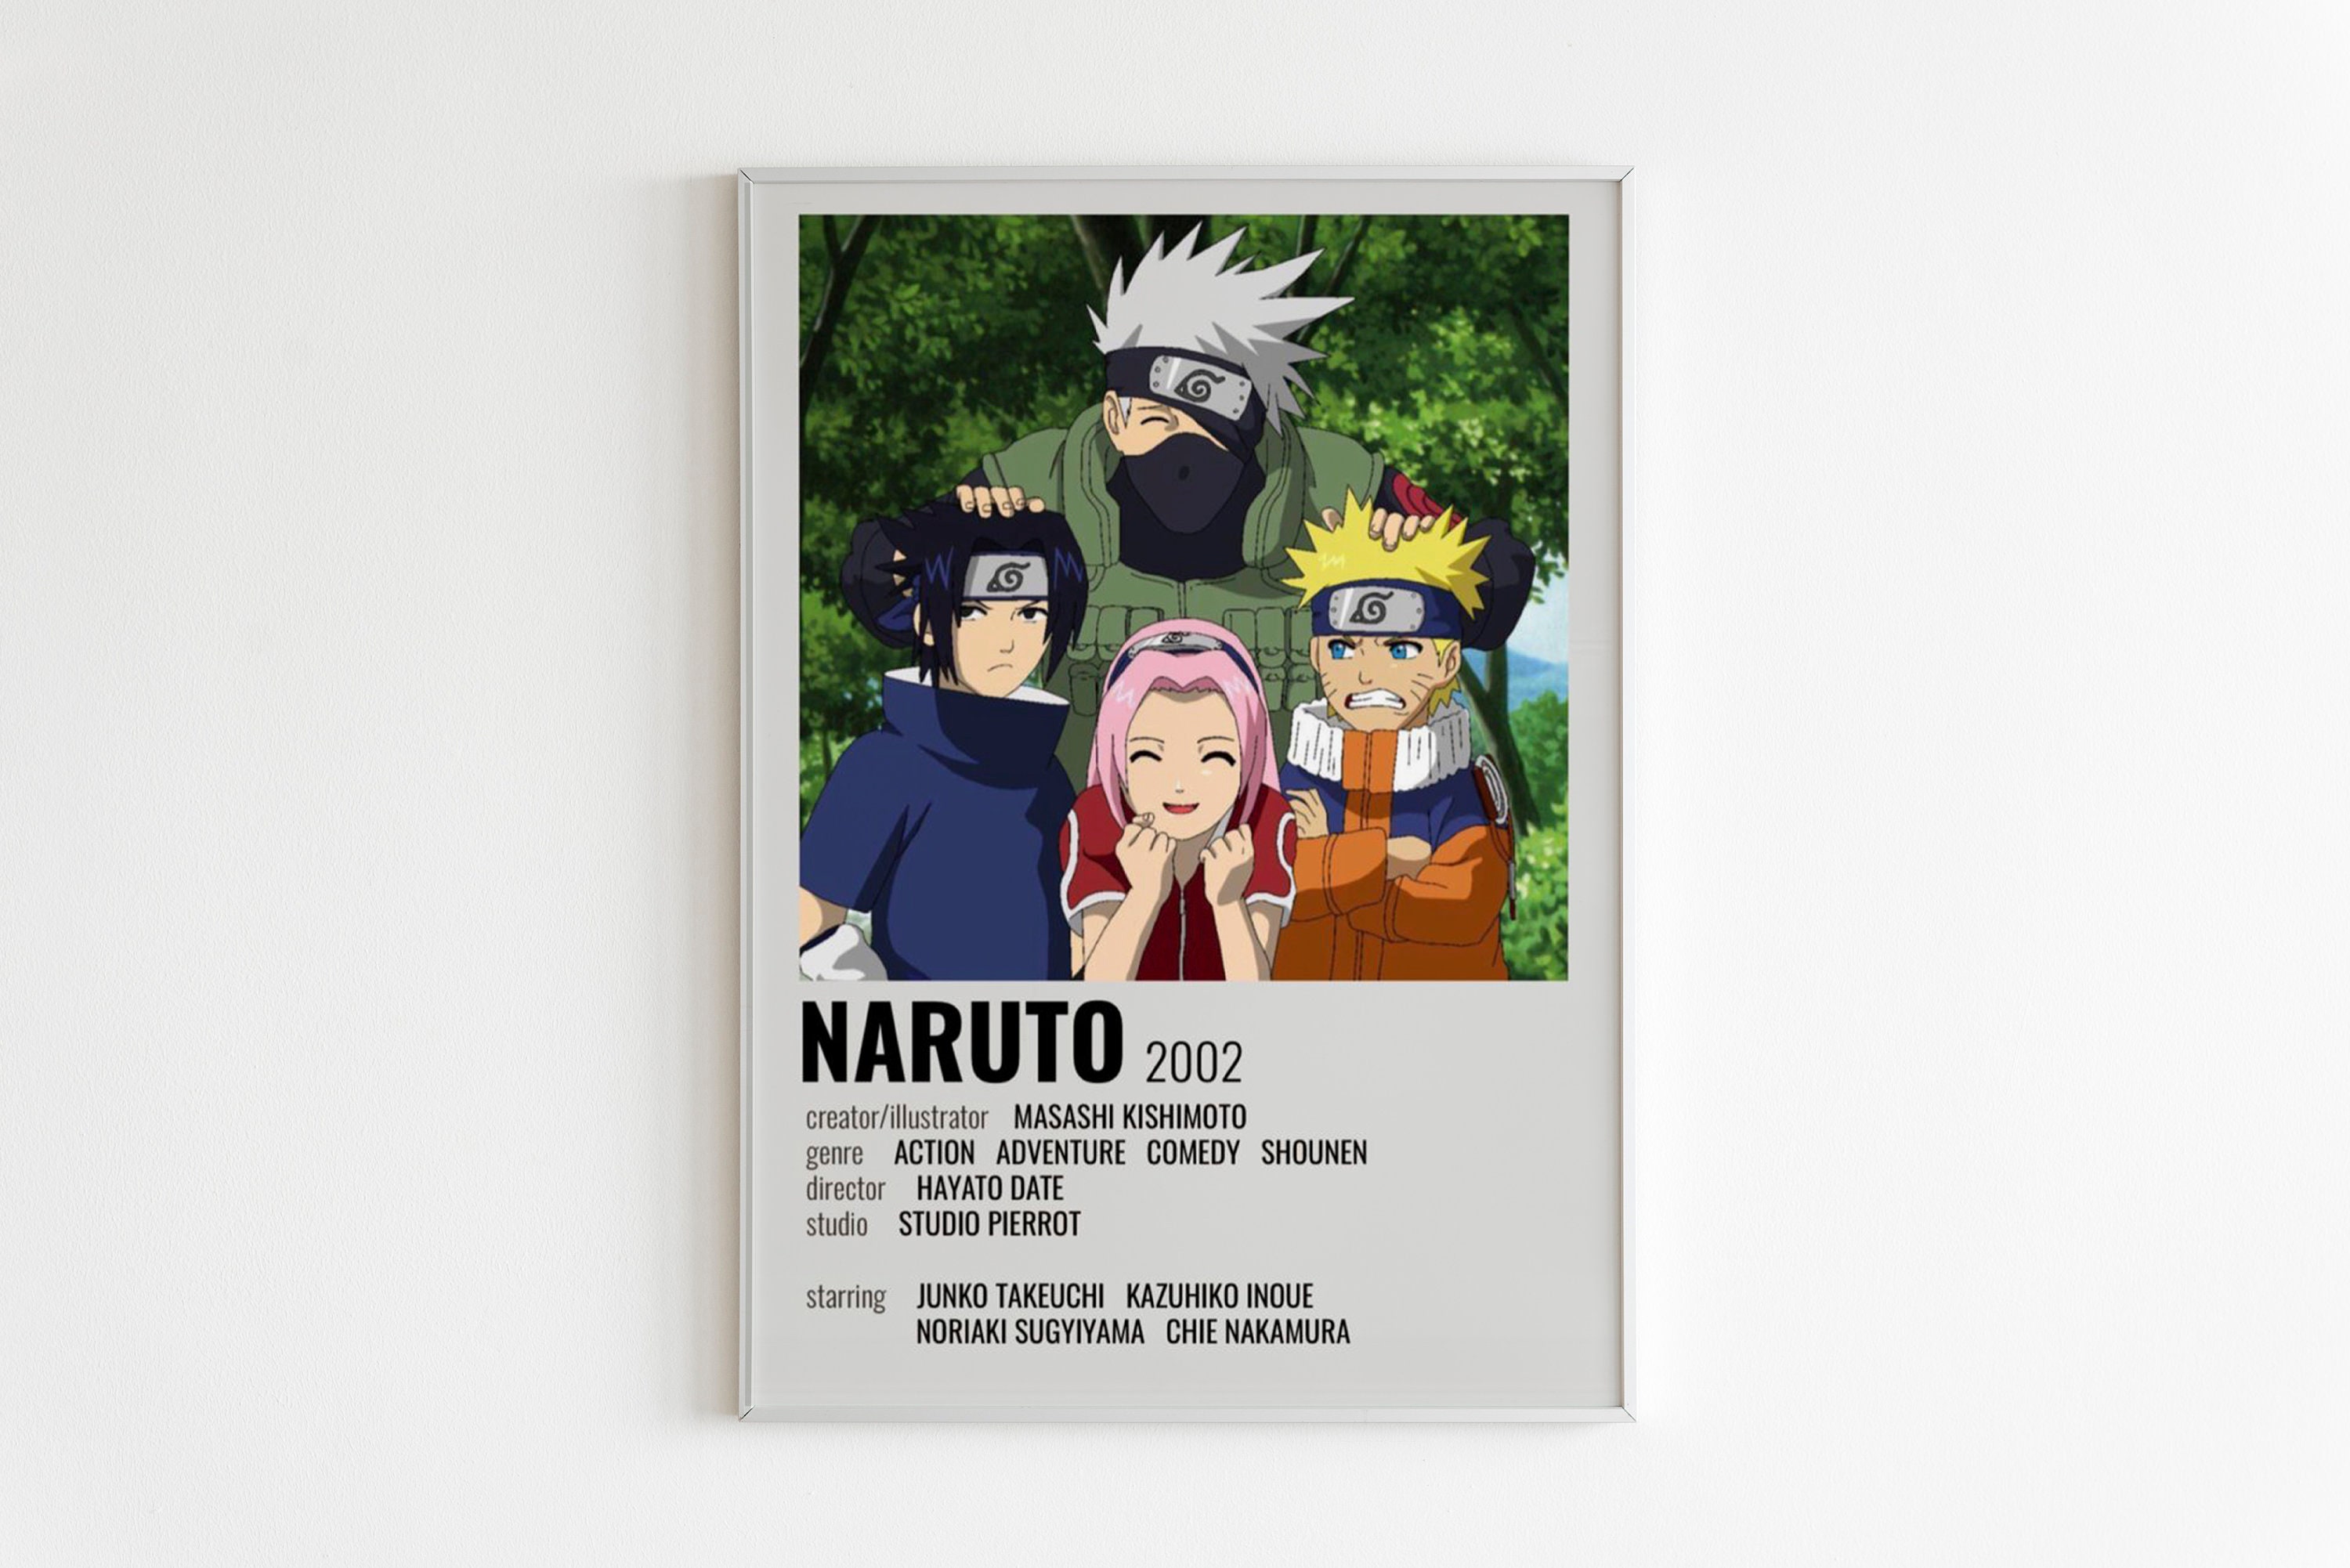 ANIME POSTER FRAME (NARUTO) - Black/White Wall Poster For Home And Office  With Frame, (12.6*9.6) Photographic Paper (11.69 inch X 8.27 inch)